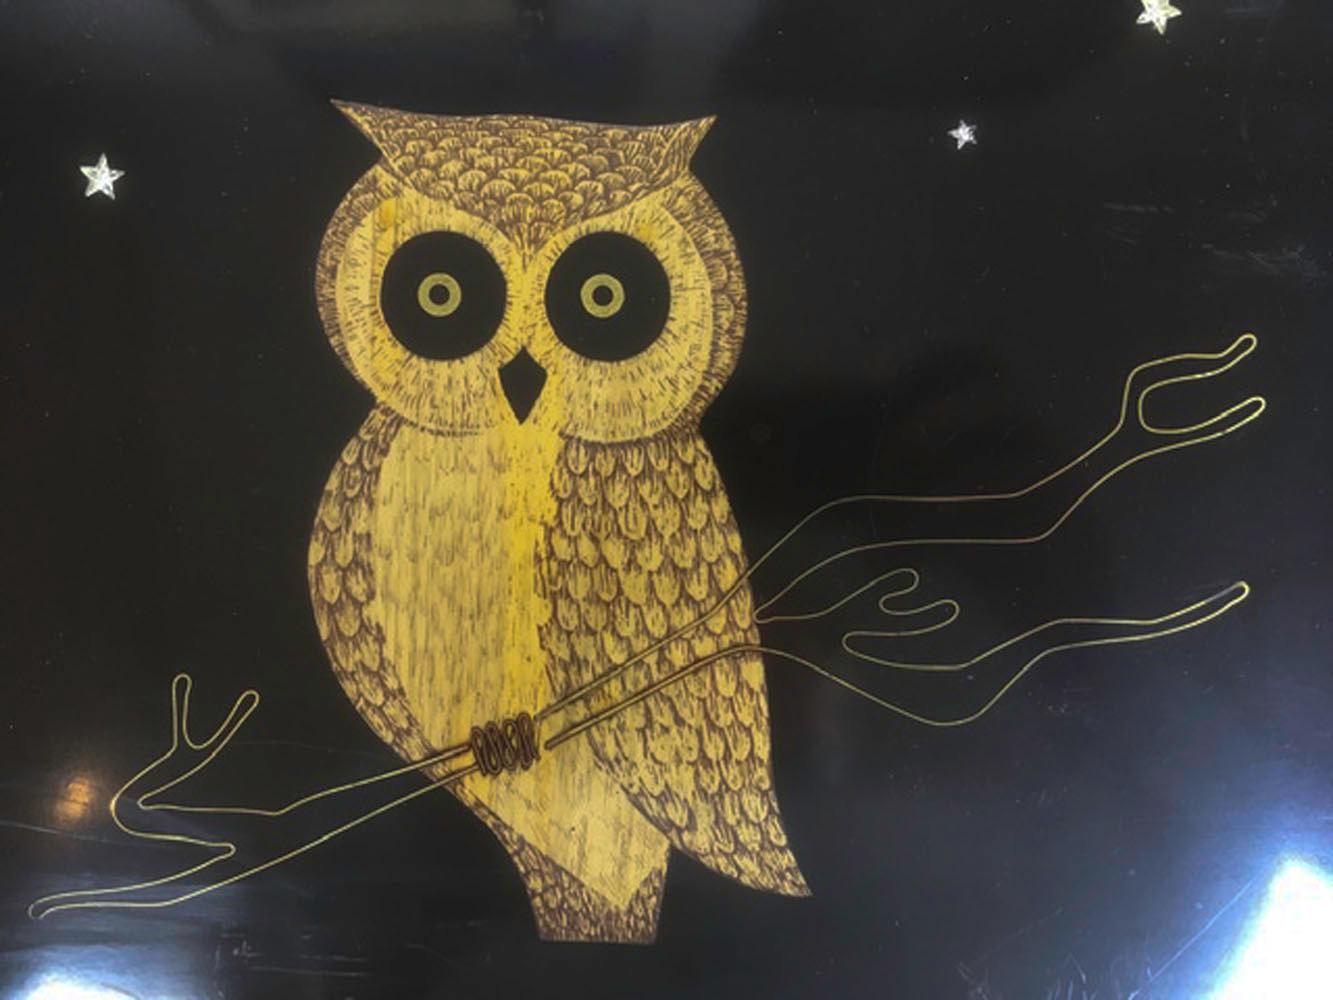 American Mid 20th Century Couroc Phenolic Resin Serving Tray, Inlaid Wood and Metal Owl